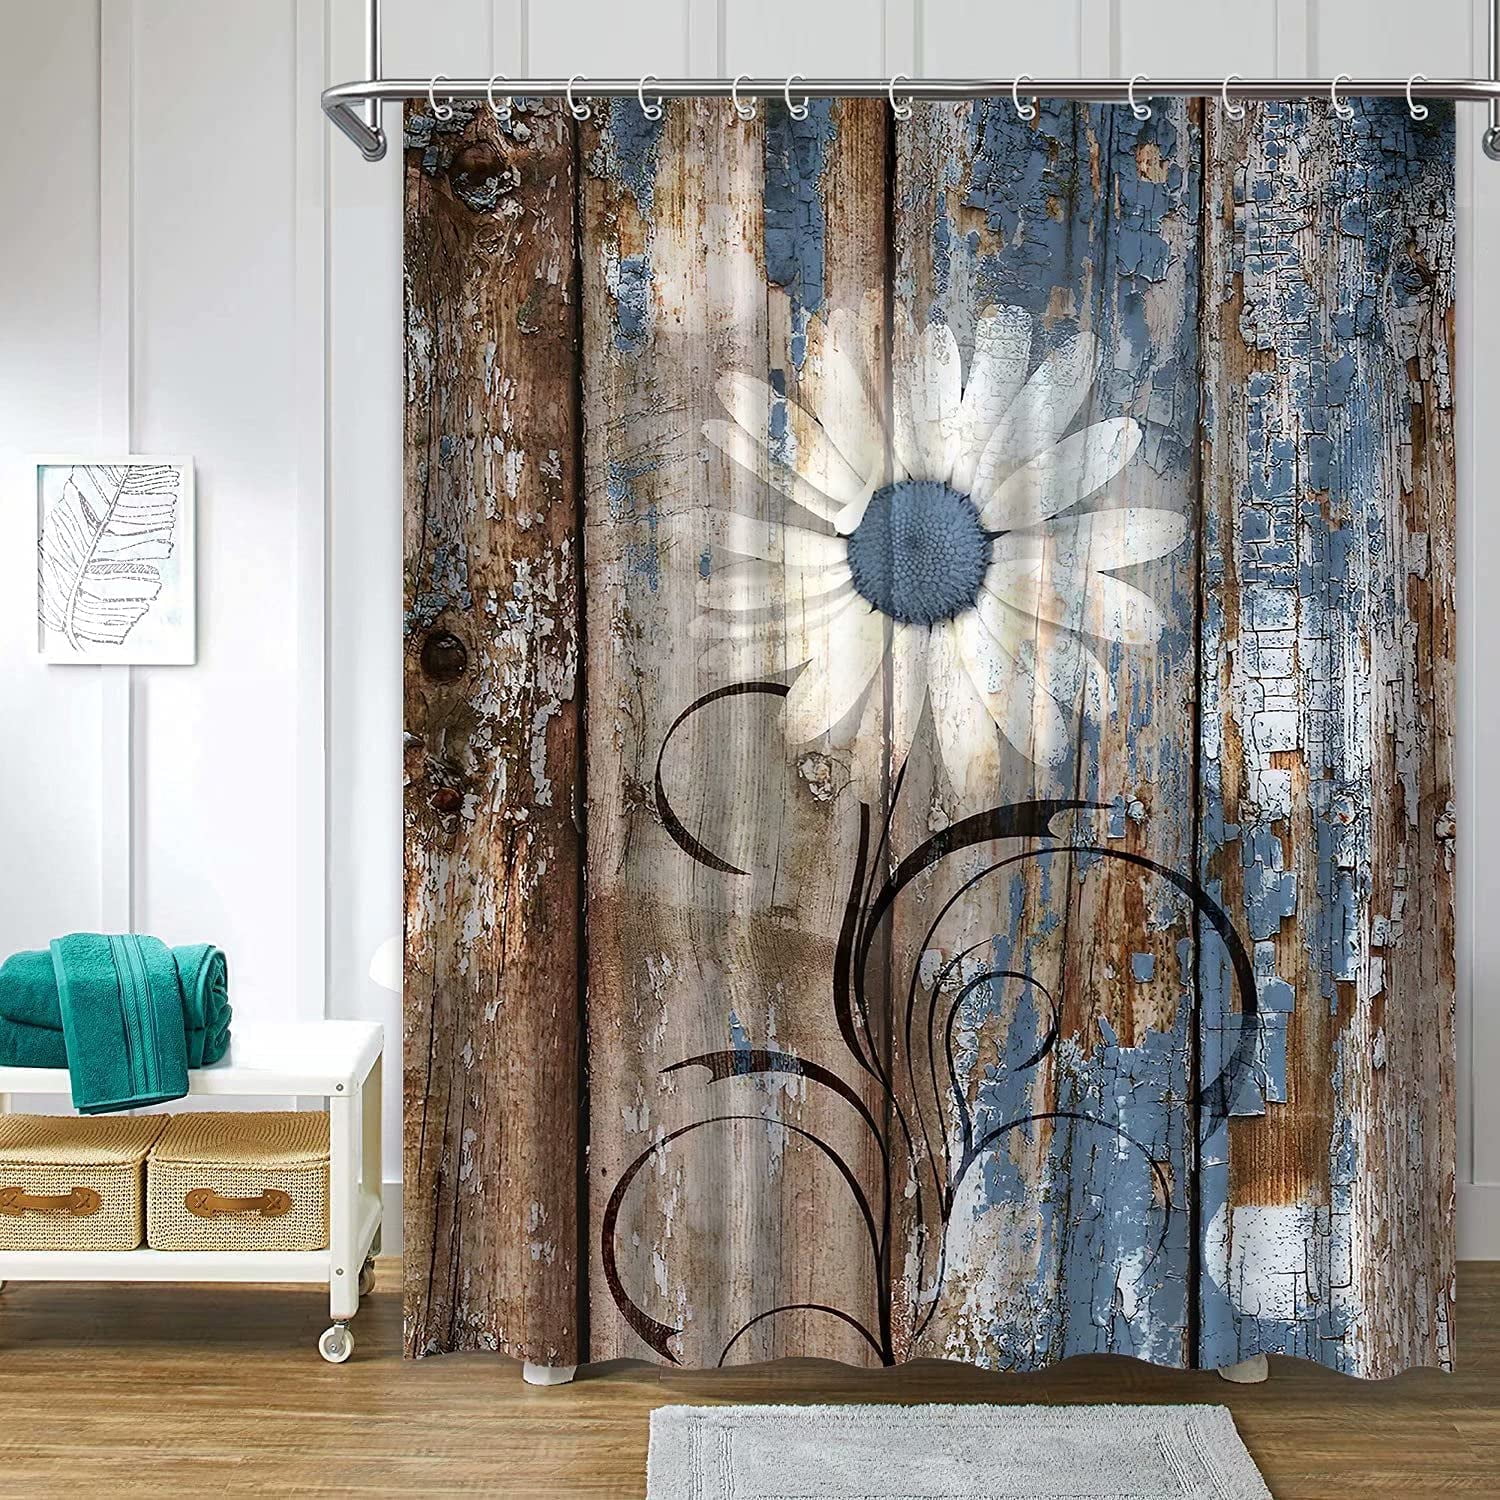 Daisies and Wooden Board Shower Curtain Complete Bathroom Set Waterproof 